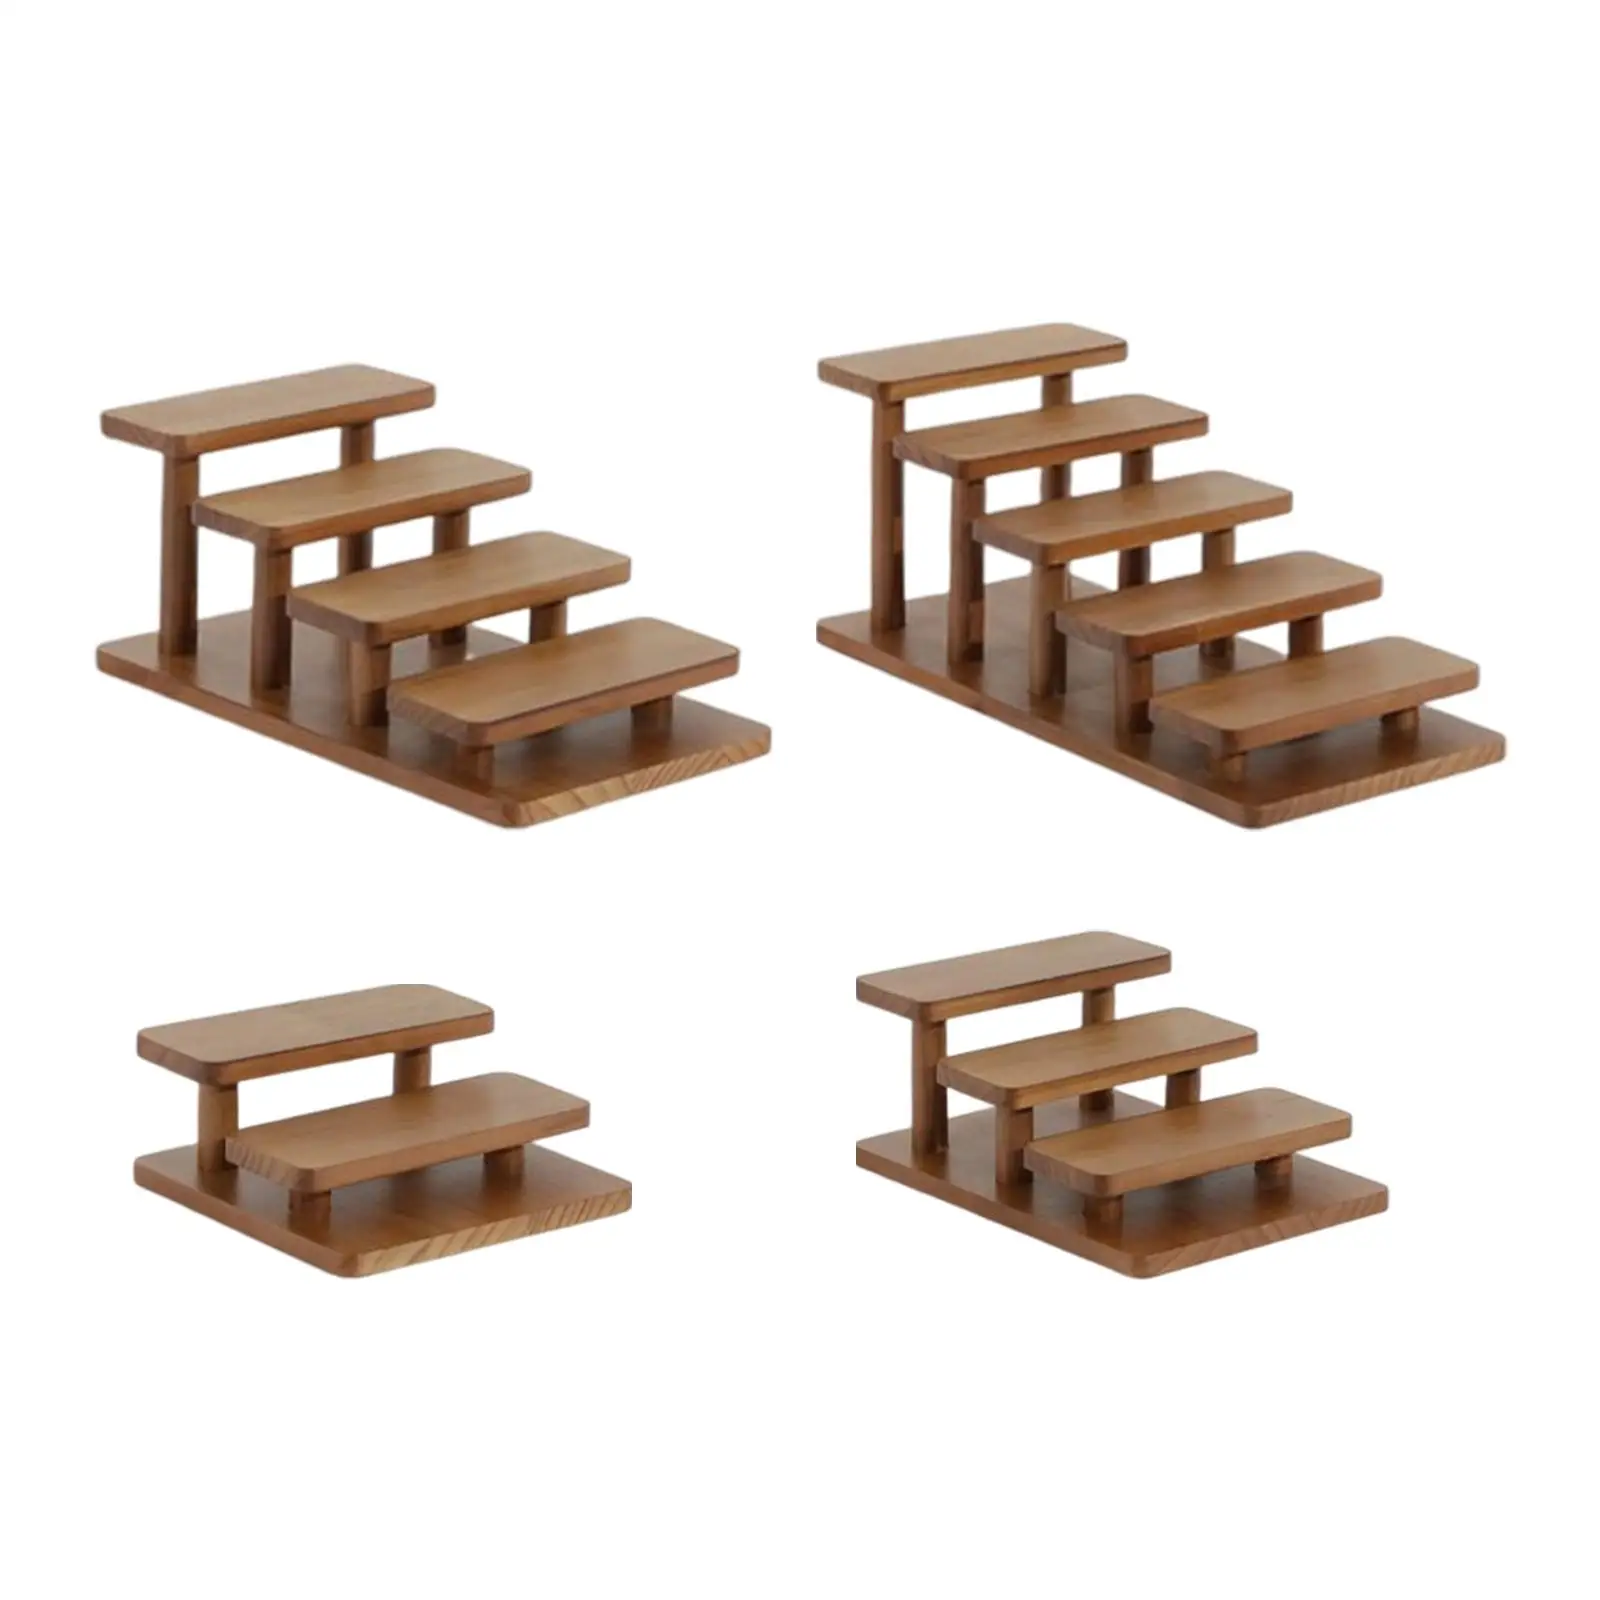 Wood Shelf Display Shelves Display Stand Counter Retail Riser for Doll Candies Action Figure